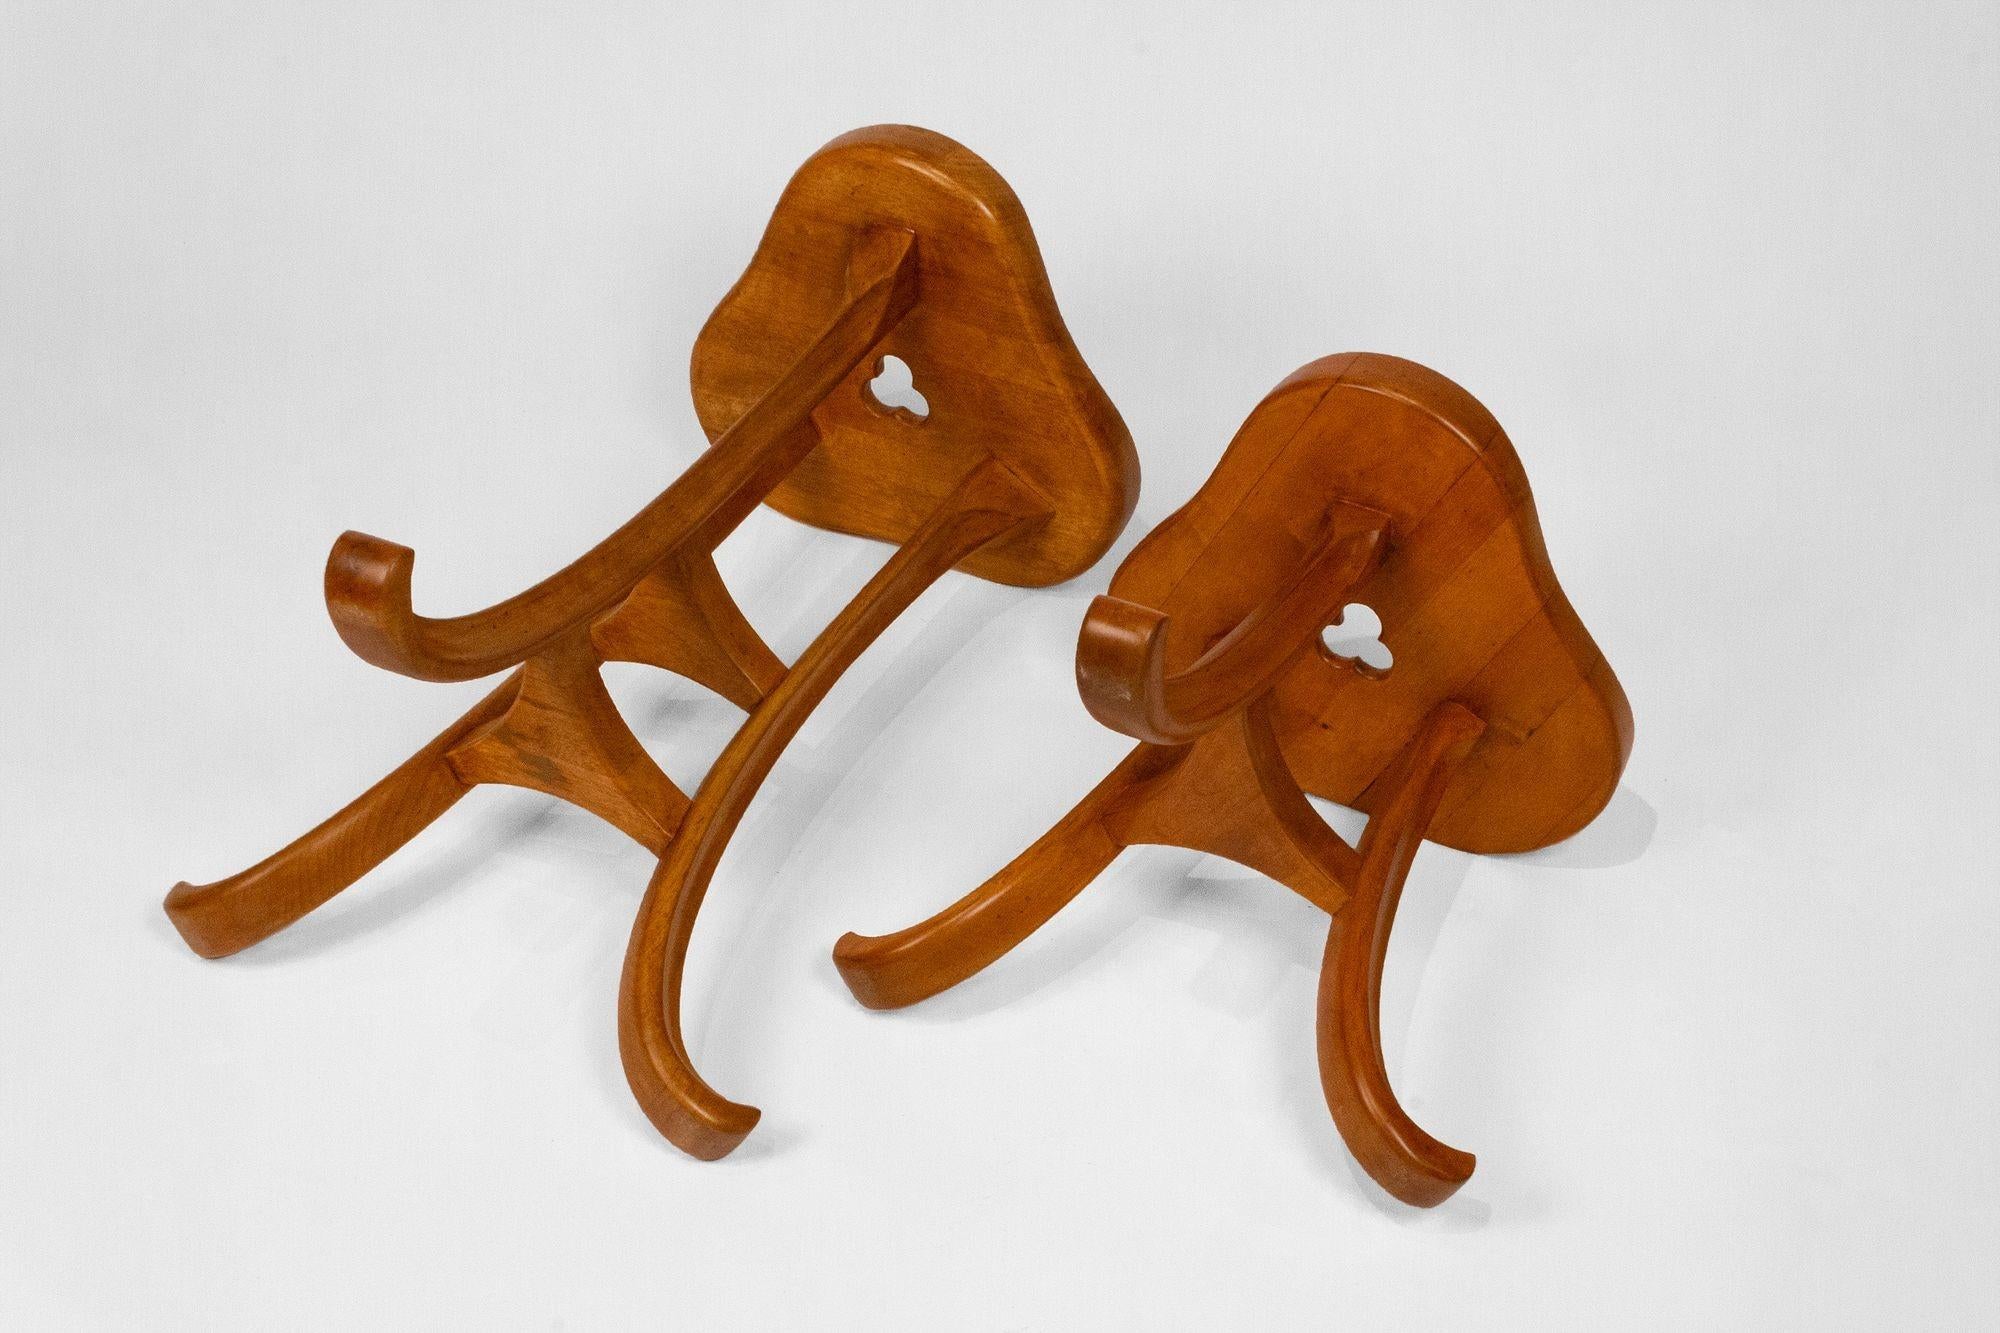 A unique pair of vintage three-legged trefoil design stools. Both stools are in very good condition with a trefoil design top mounted on three splayed legs with triangular shelves. The stools would work well in an Edward Wormley or Robsjohn Gibbings